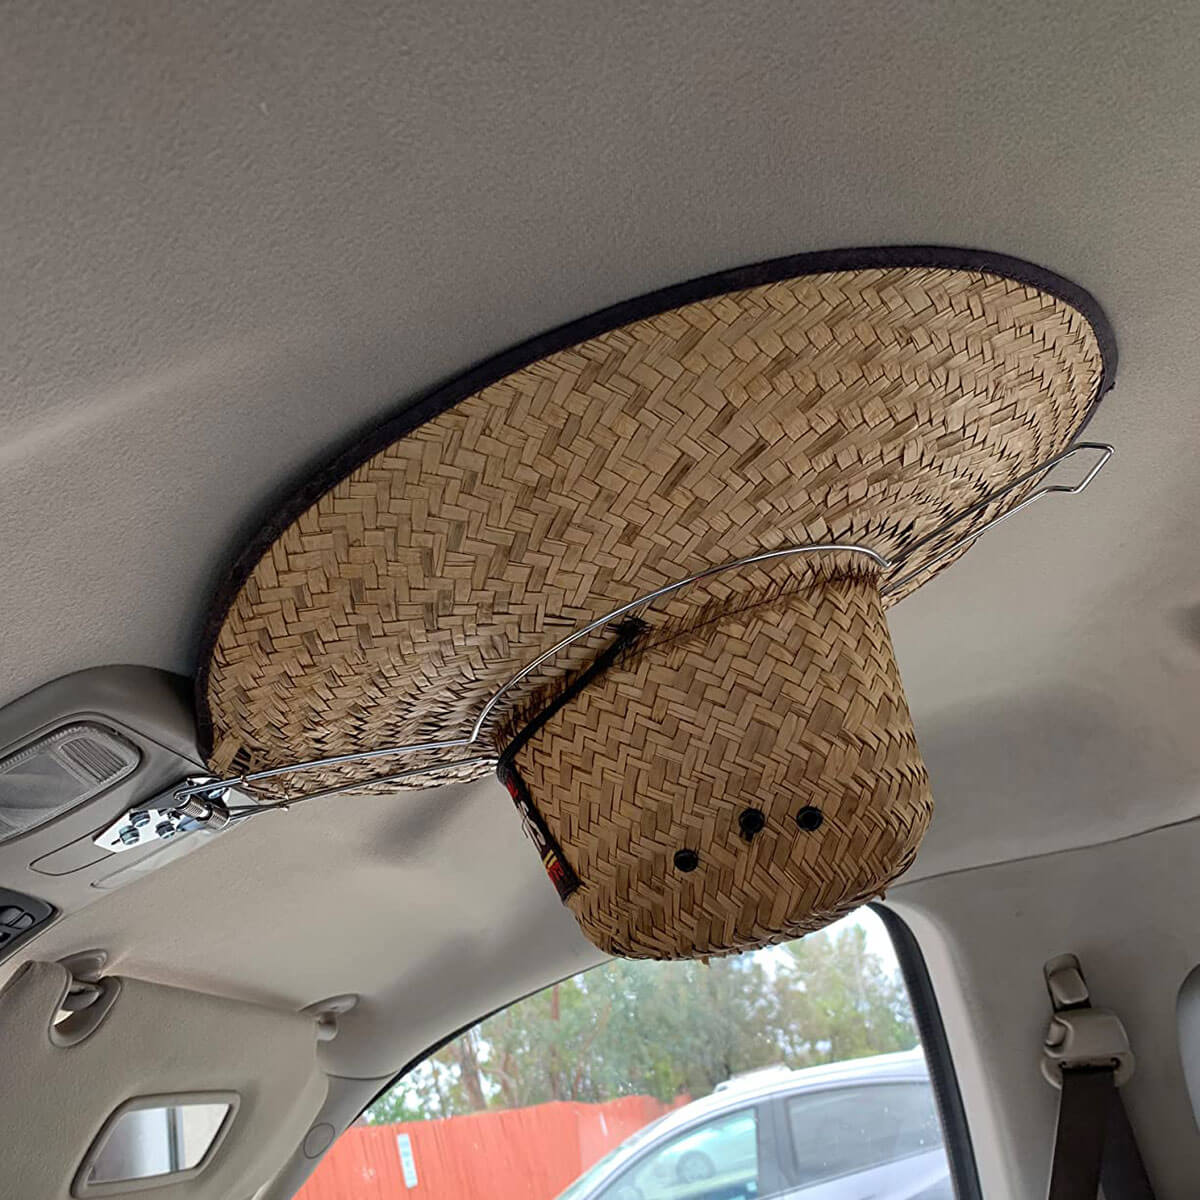 Rope Cowboy Hat Holder For Truck | canoeracing.org.uk